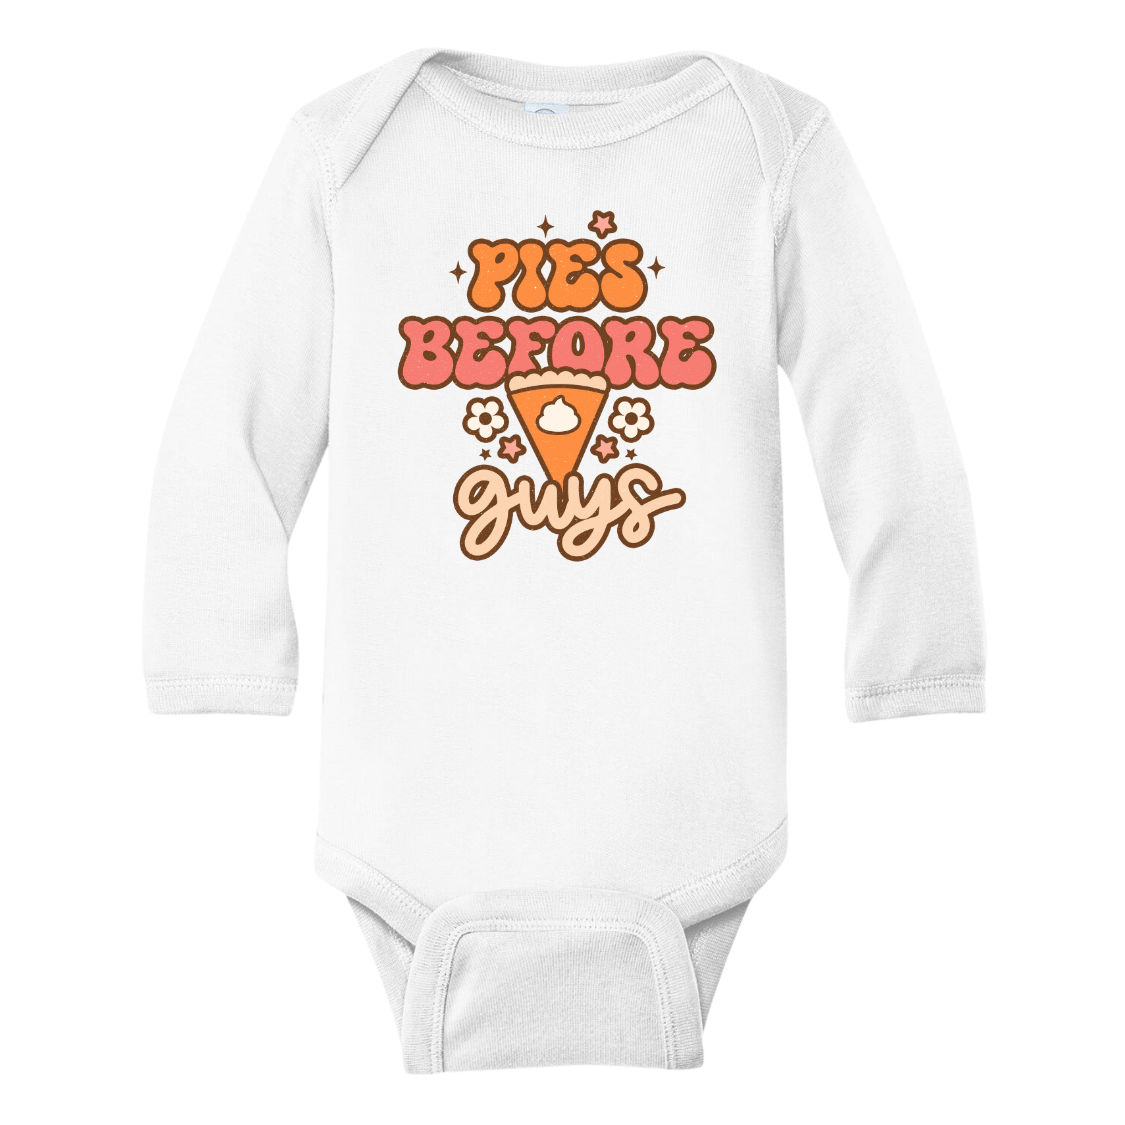 A kids' t-shirt with an adorable graphic of a cute pumpkin pie and the text 'Pie before guys.' The design represents a playful and confident attitude, celebrating the love for desserts and individuality. It's a fun and fashionable tee that showcases the wearer's unique style and personality.